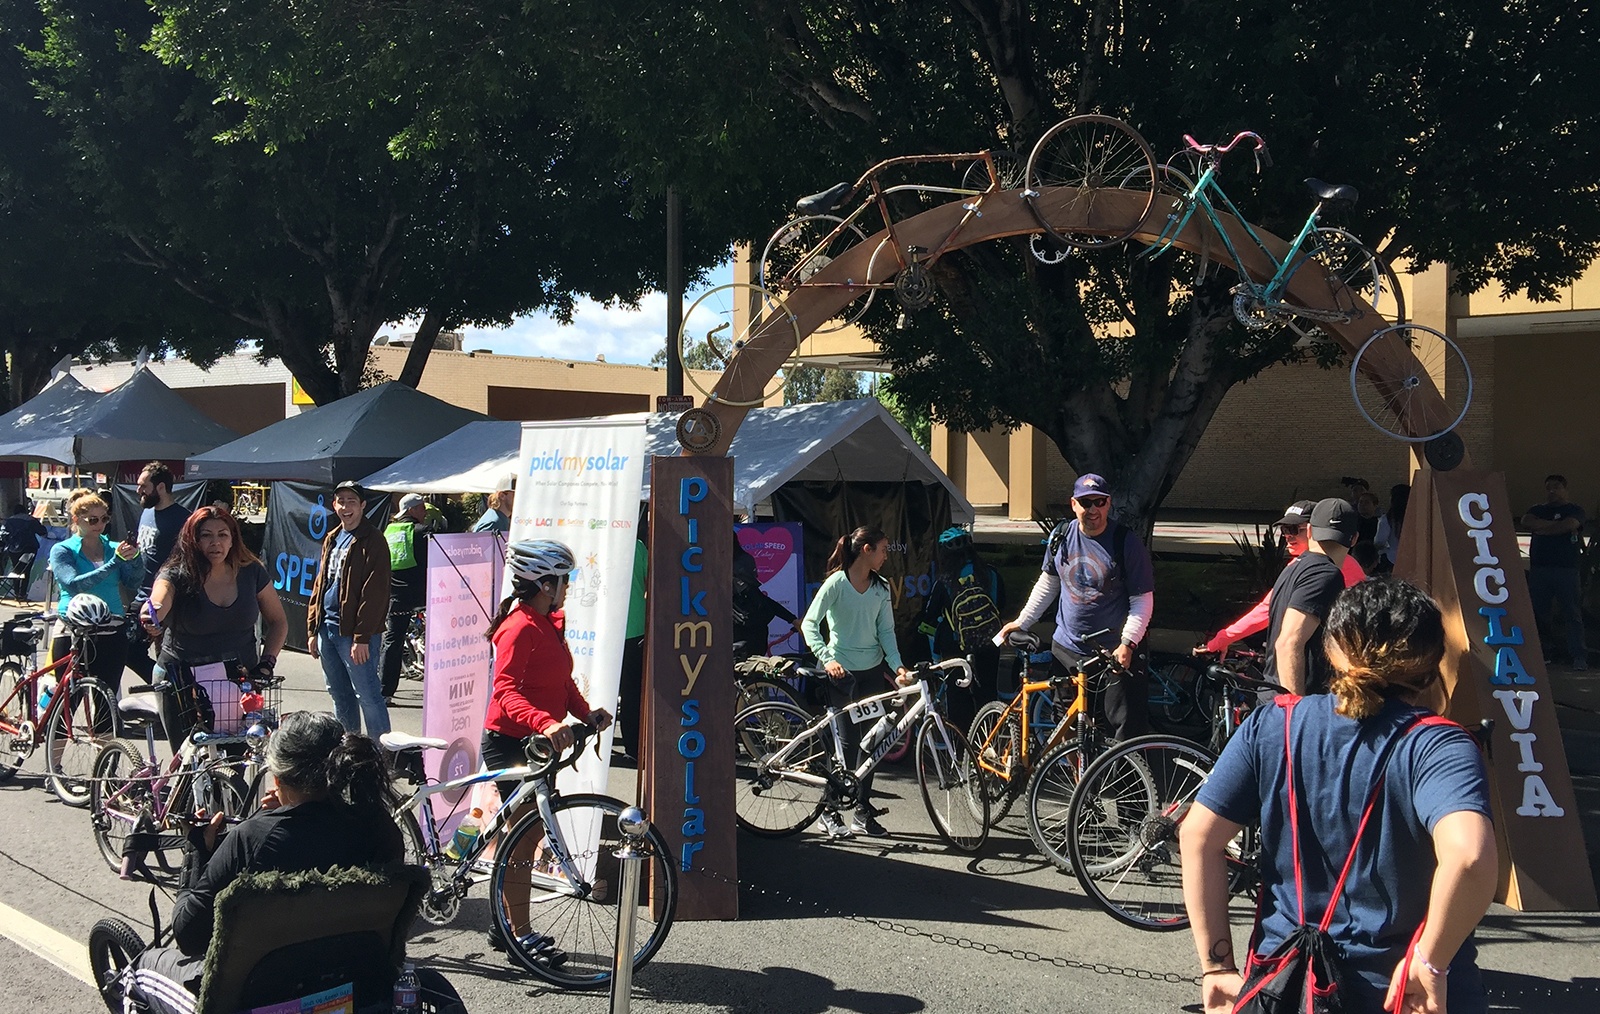 Pick My Solar and CicLAvia in San Fernando Valley